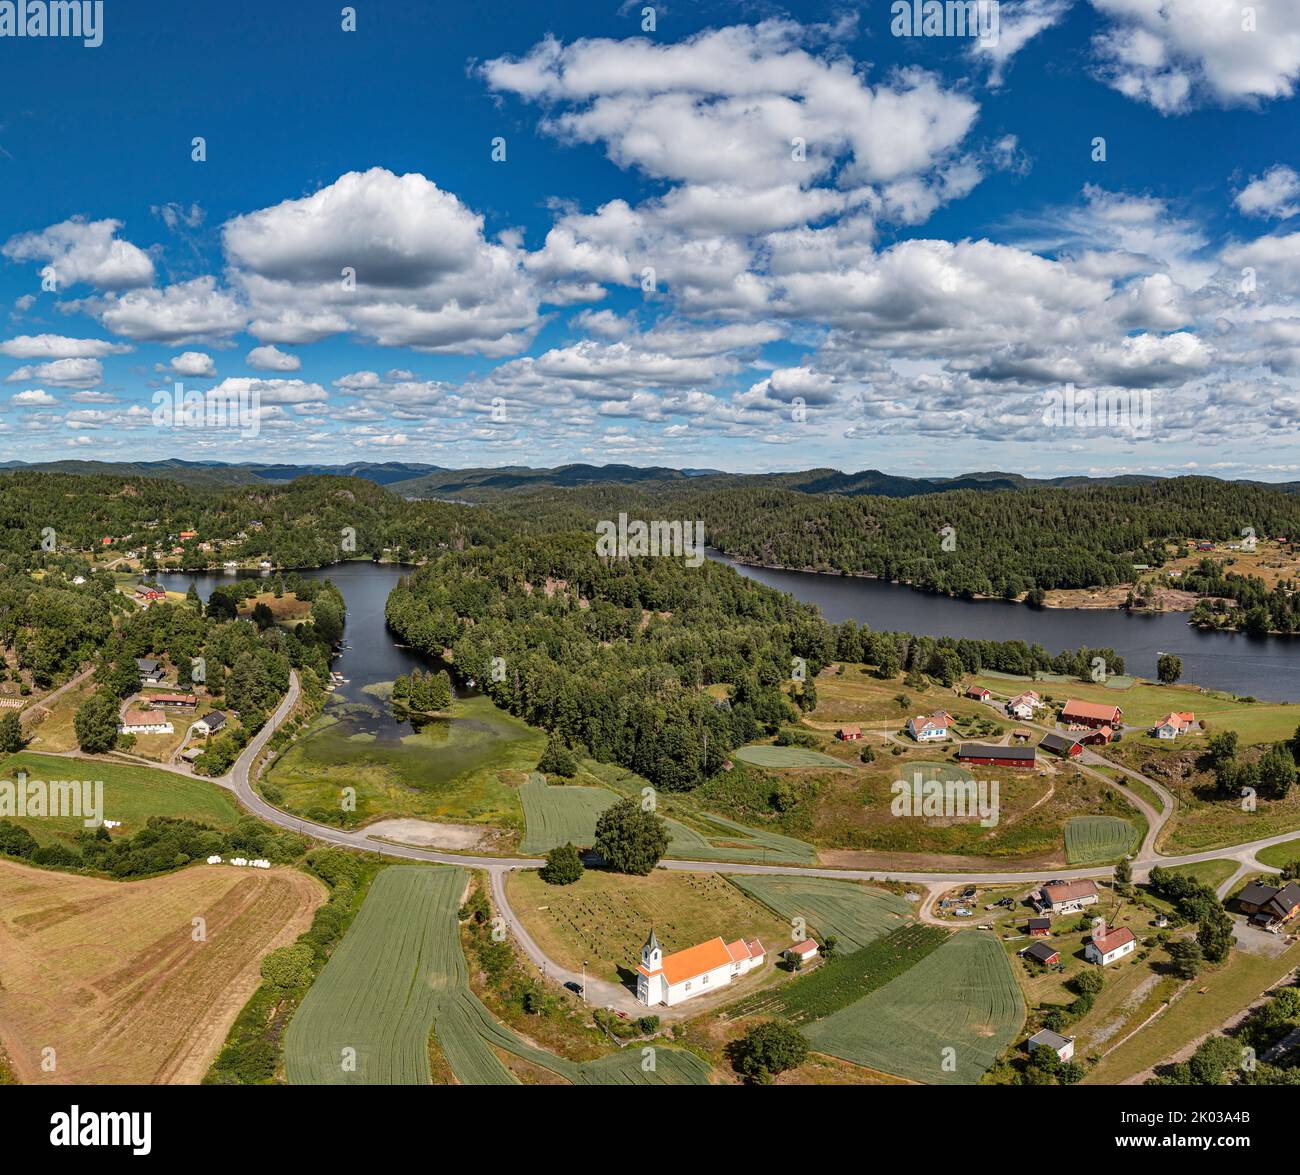 Norway, Vestfold og Telemark, Larvik, Kjose, isolated houses, church, road, farris, lake, forest, mountains, overview, aerial view Stock Photo